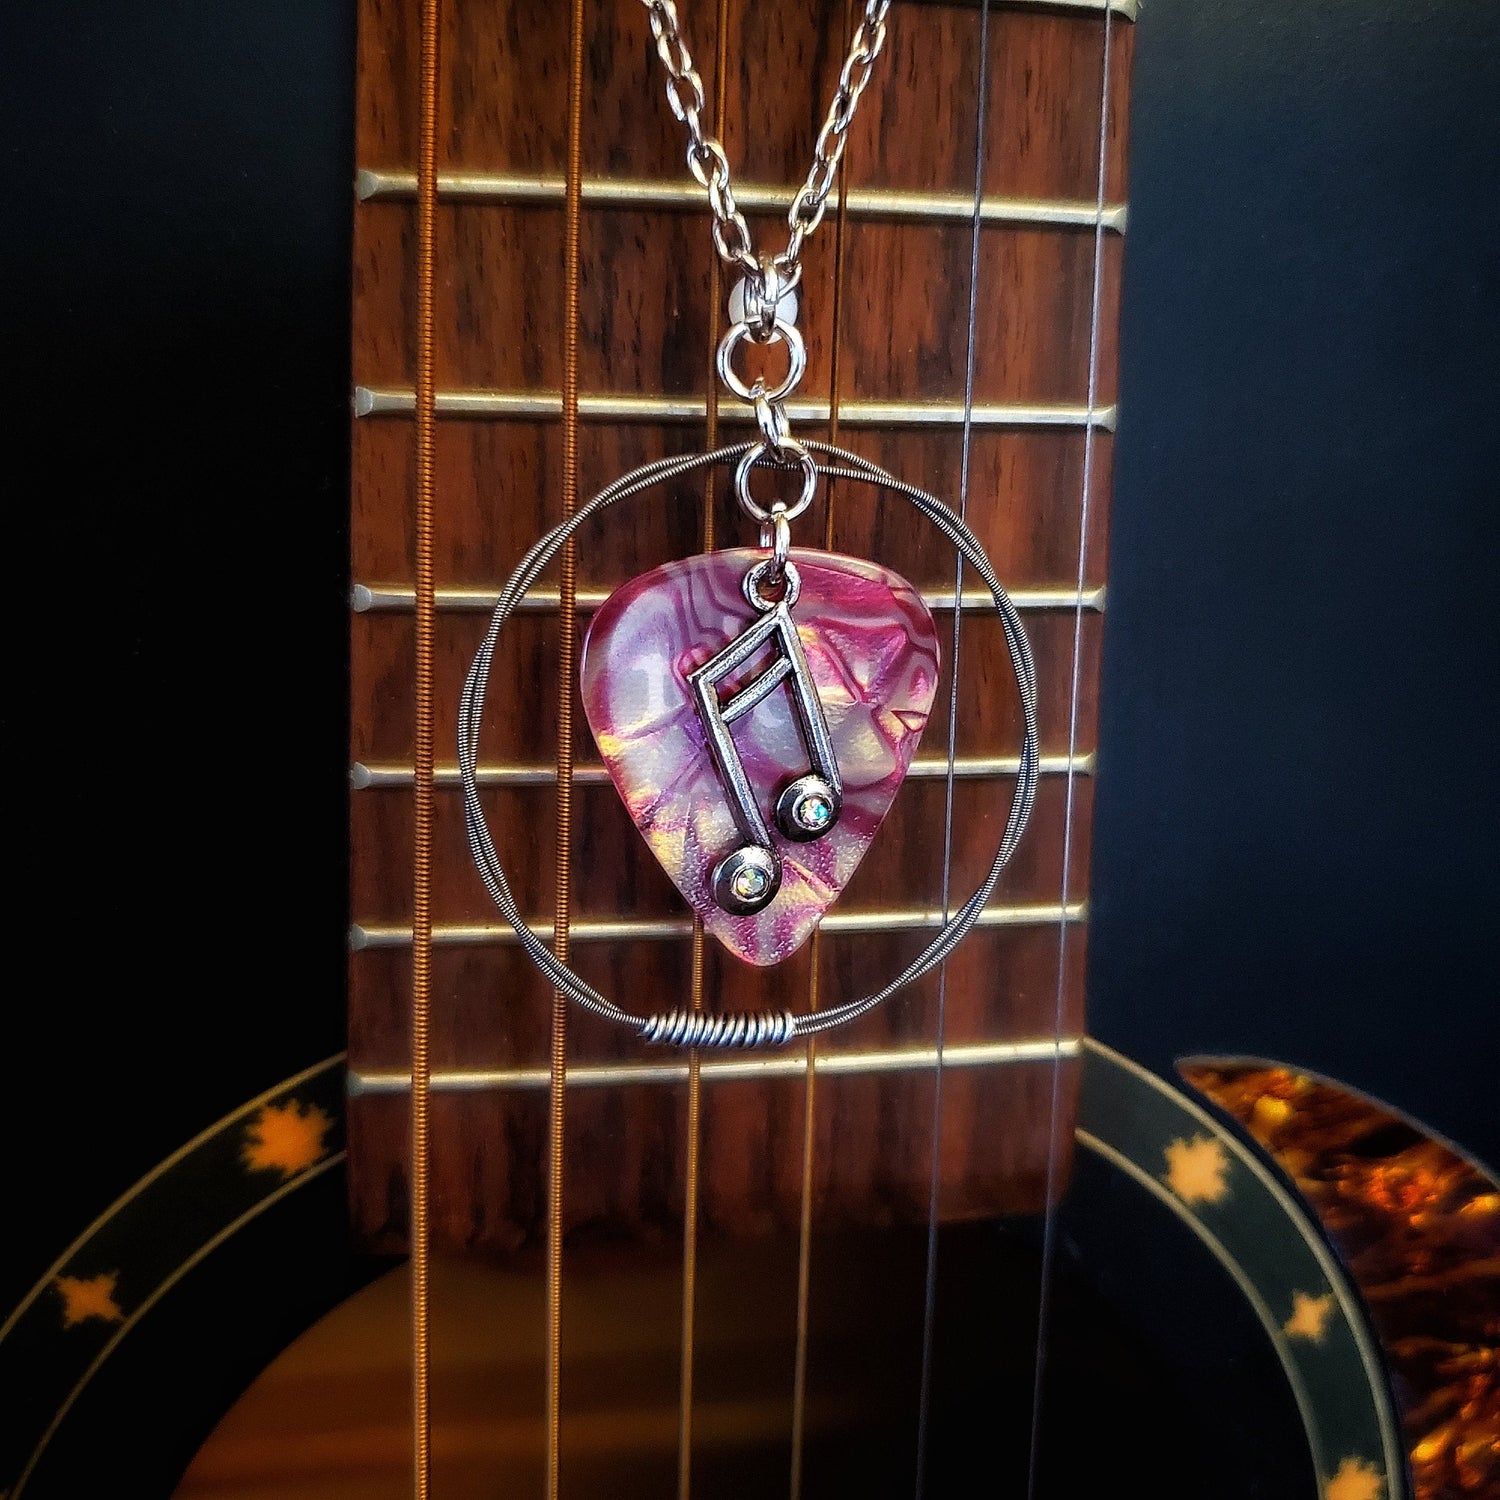 A necklace made from a red marbled guitar pick and upcycled guitar strings with a silver coloured chain hangs in front of a black guitar